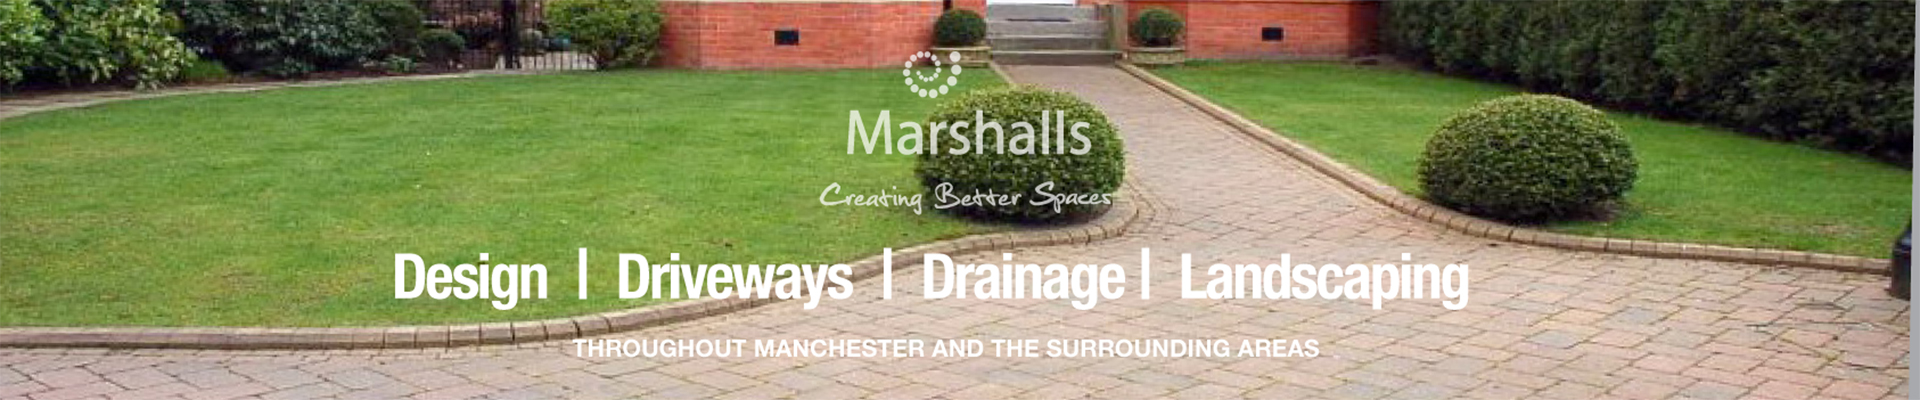 Driveways & Landscaping Manchester